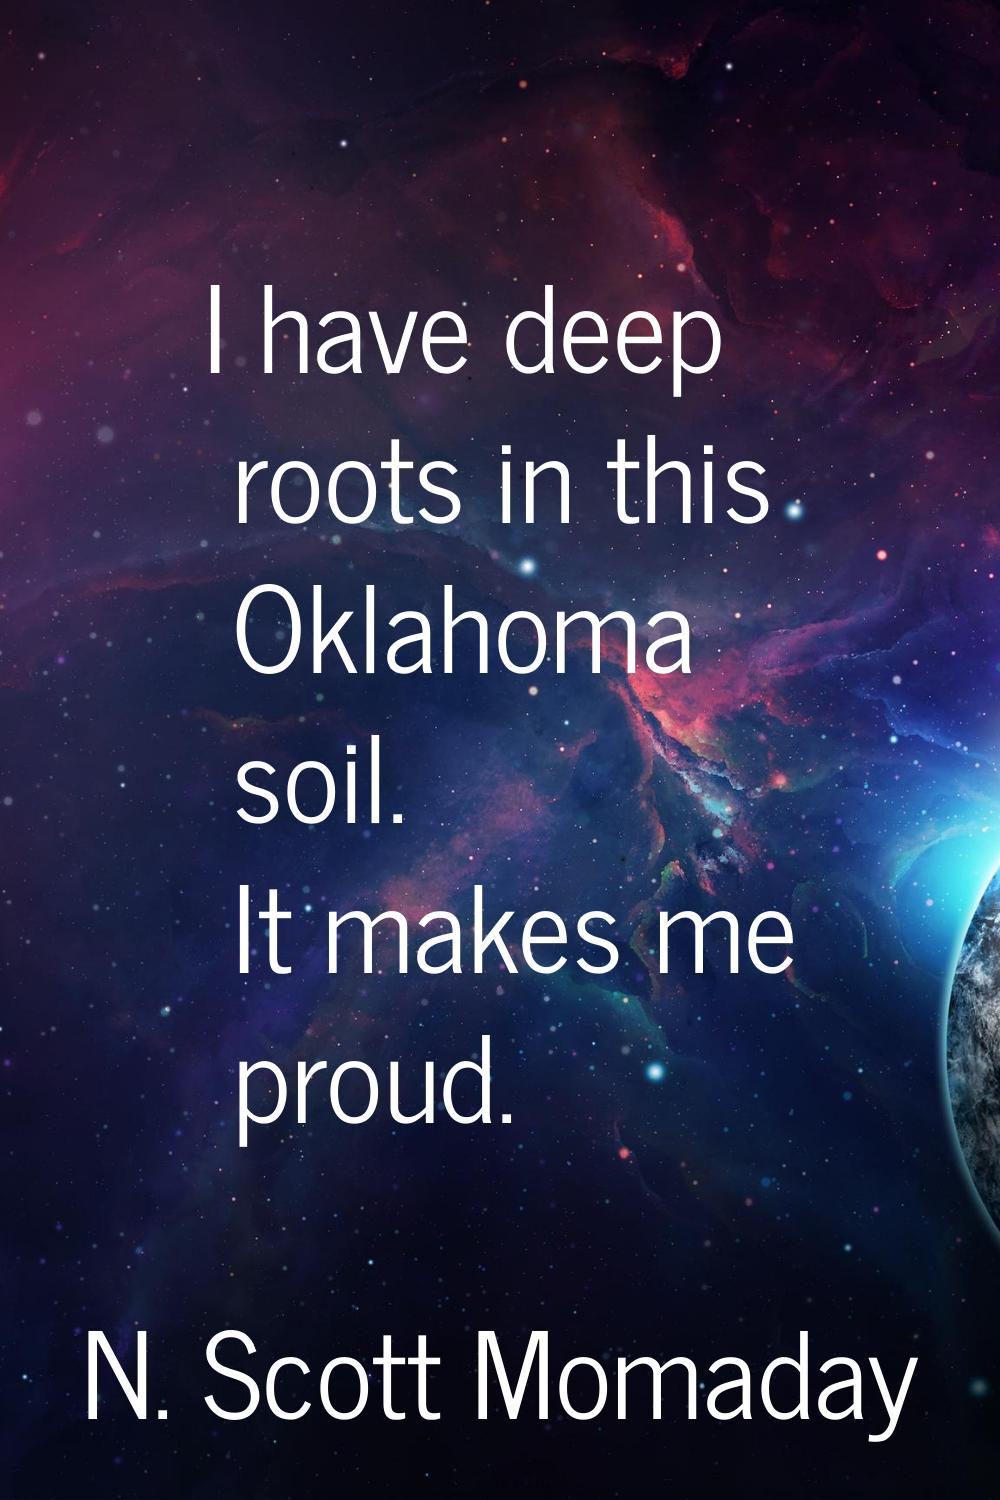 I have deep roots in this Oklahoma soil. It makes me proud.